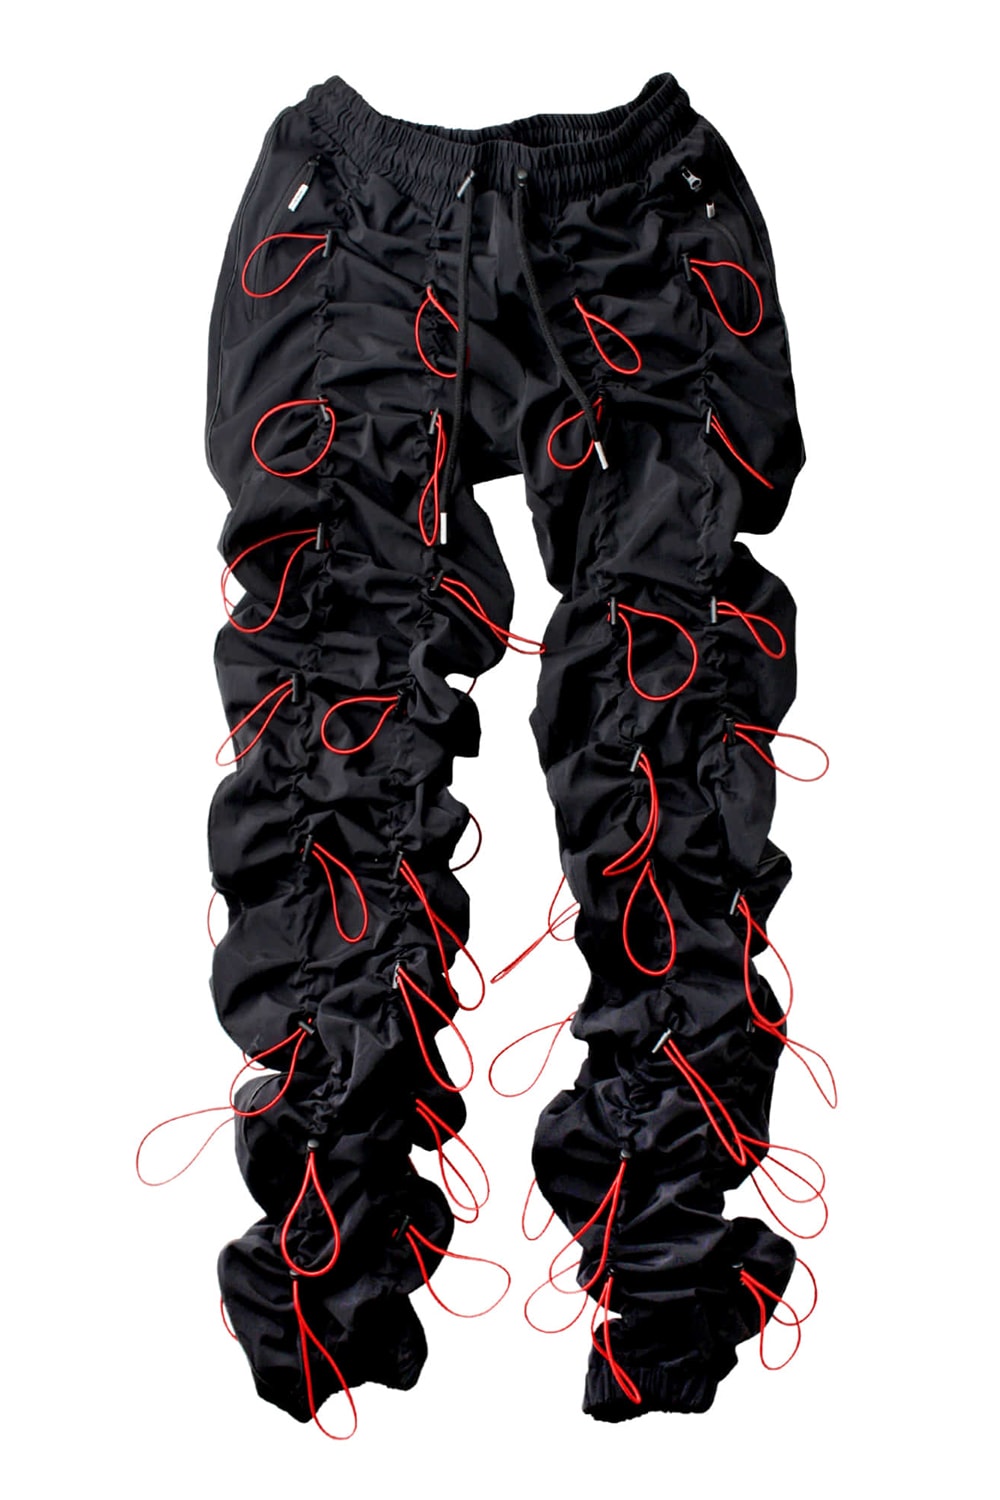 99%IS Gobchang Pants Series 3 Release Info gopchang trousers rappers style hip-hop wrinkle black white rainbow red pink gray purple 99percentis drop date price info 